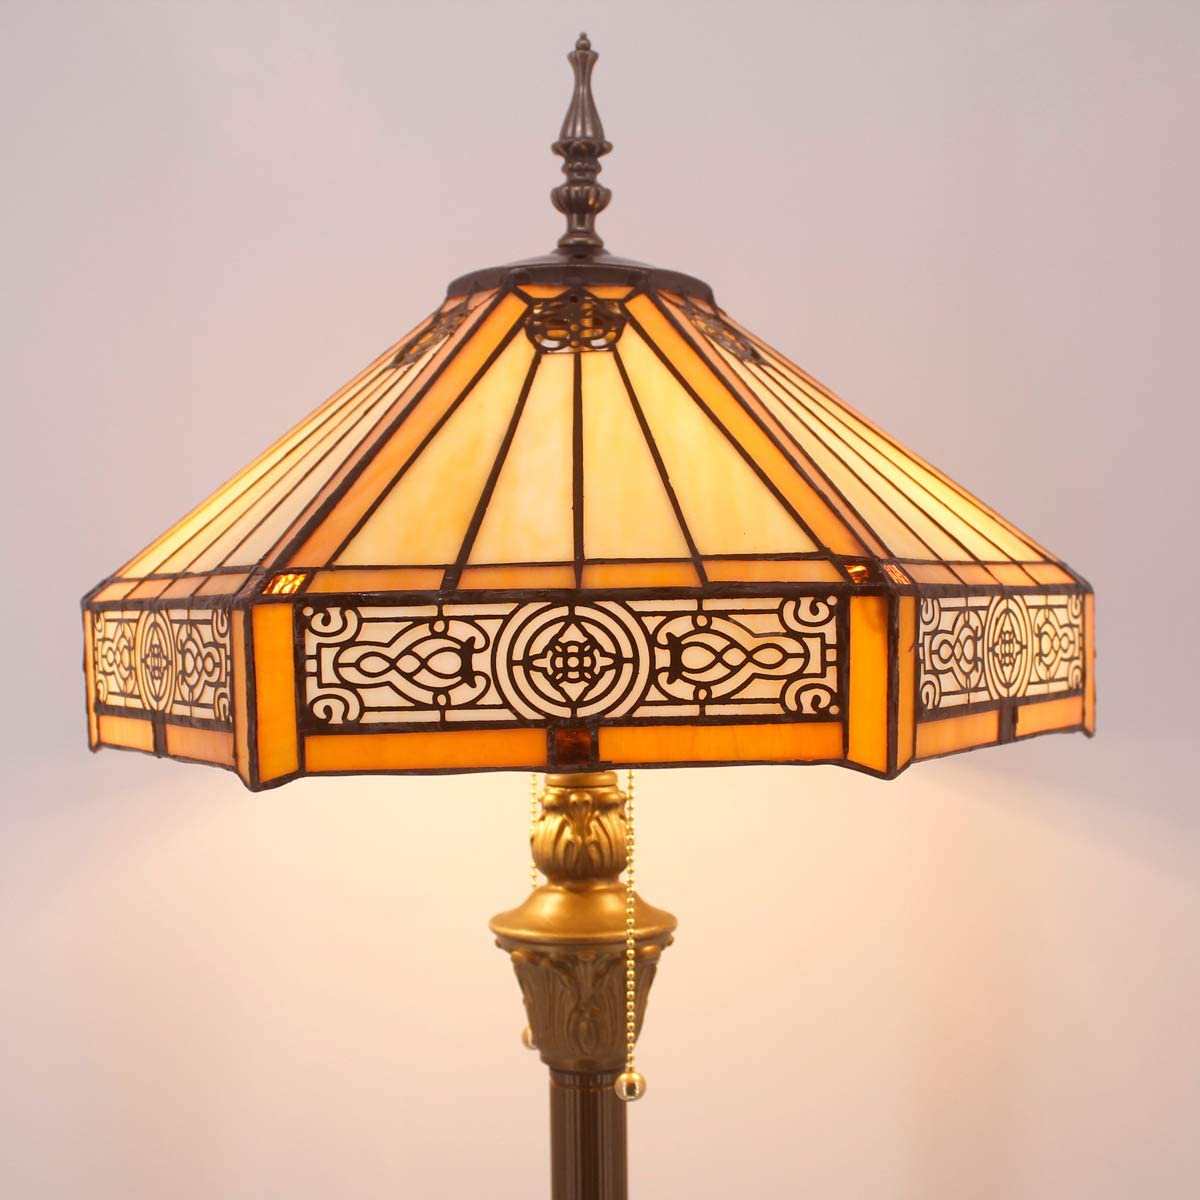 BBNBDMZ  Floor Lamp Yellow Hexagon Stained Glass Mission Standing Reading Light 16X16X64 Inches Antique Pole Corner Lamp Decor Bedroom Living Room  Office S011 Series